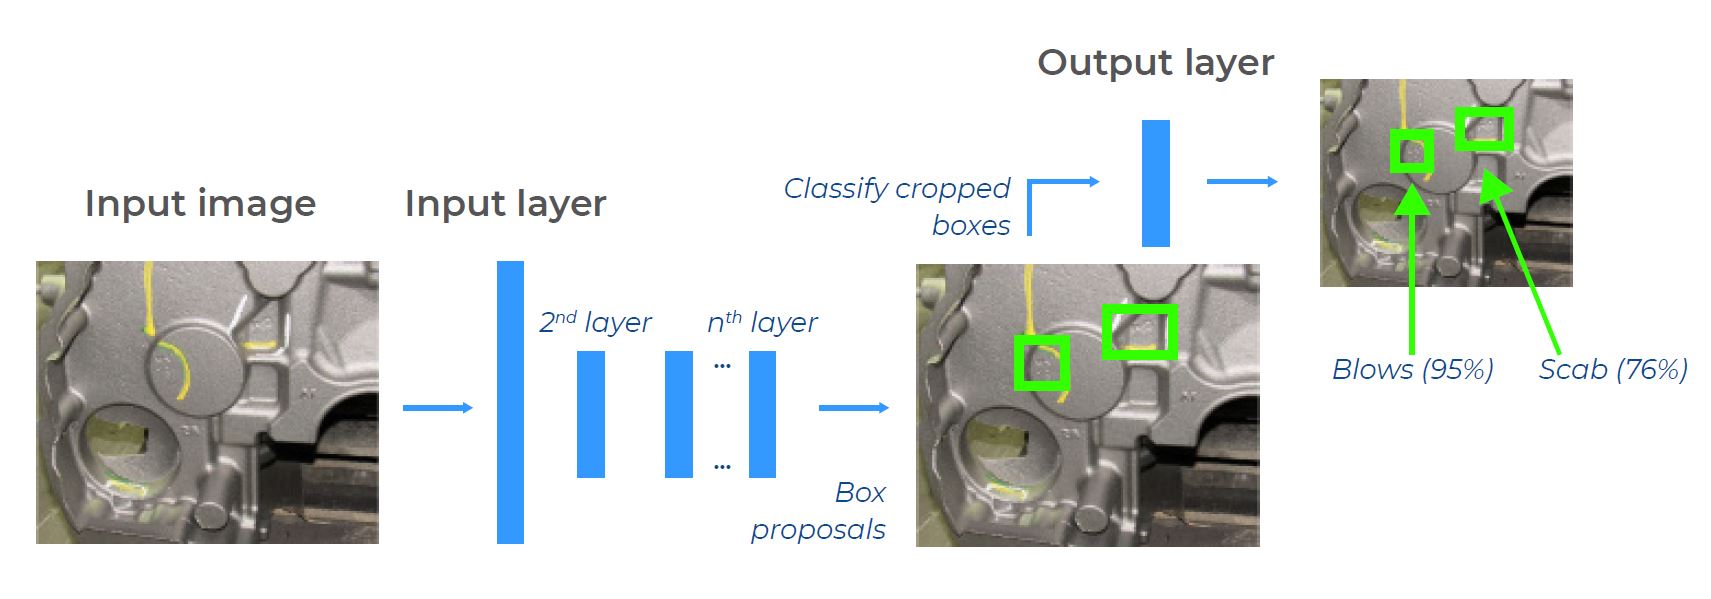 Through Artificial Intelligence (AI), the Inspect system improves continually and can locate and classify defects on components that the computer system has never seen before. (Image: DataProphet Ltd.)